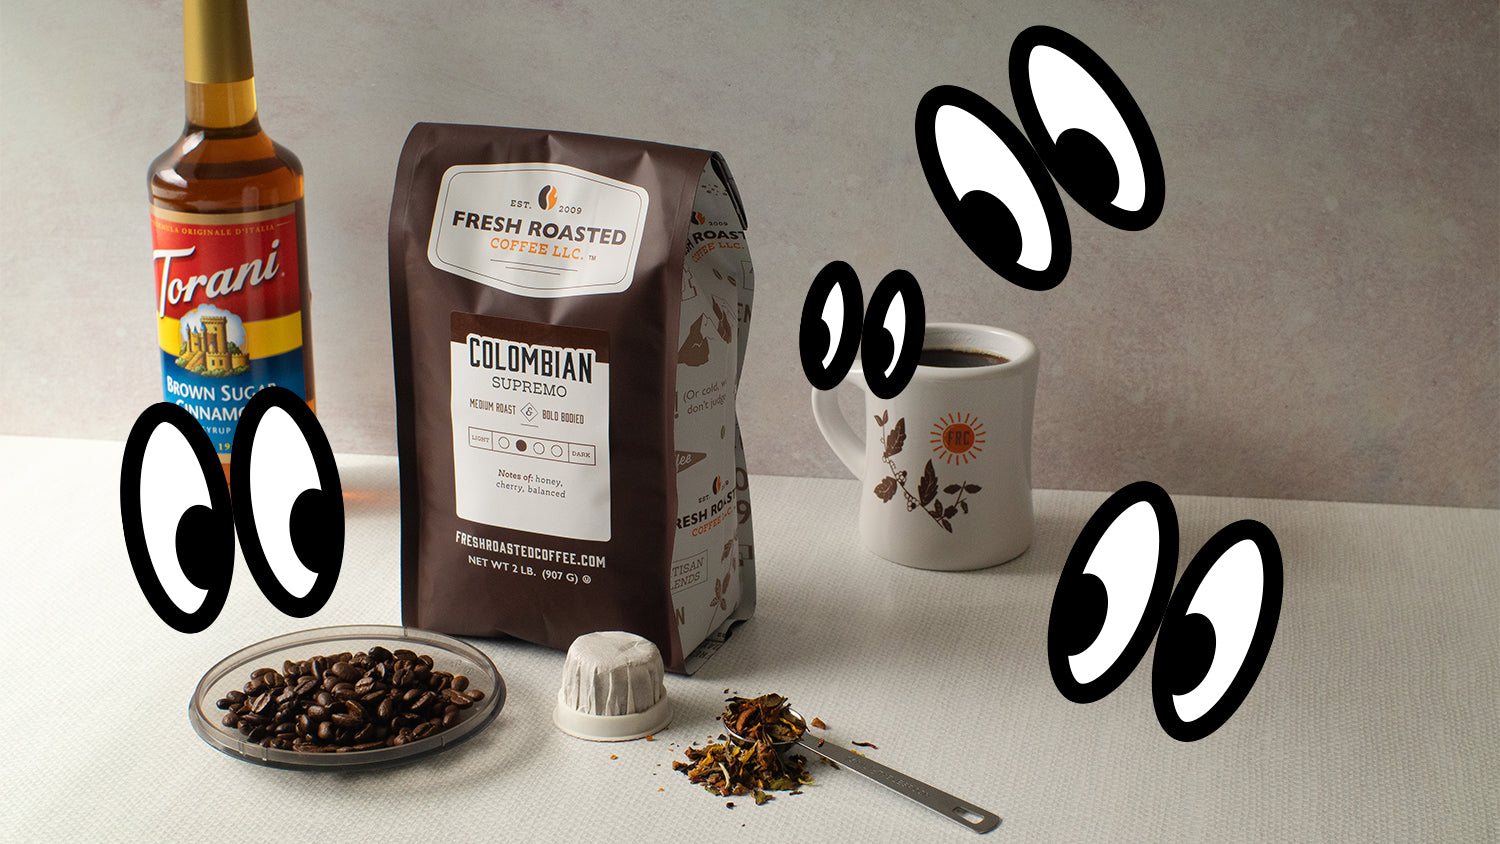 A bag of coffee, Torani syrup, mug, loose-leaf tea, and a compostable pod with illustrated eyes looking on.